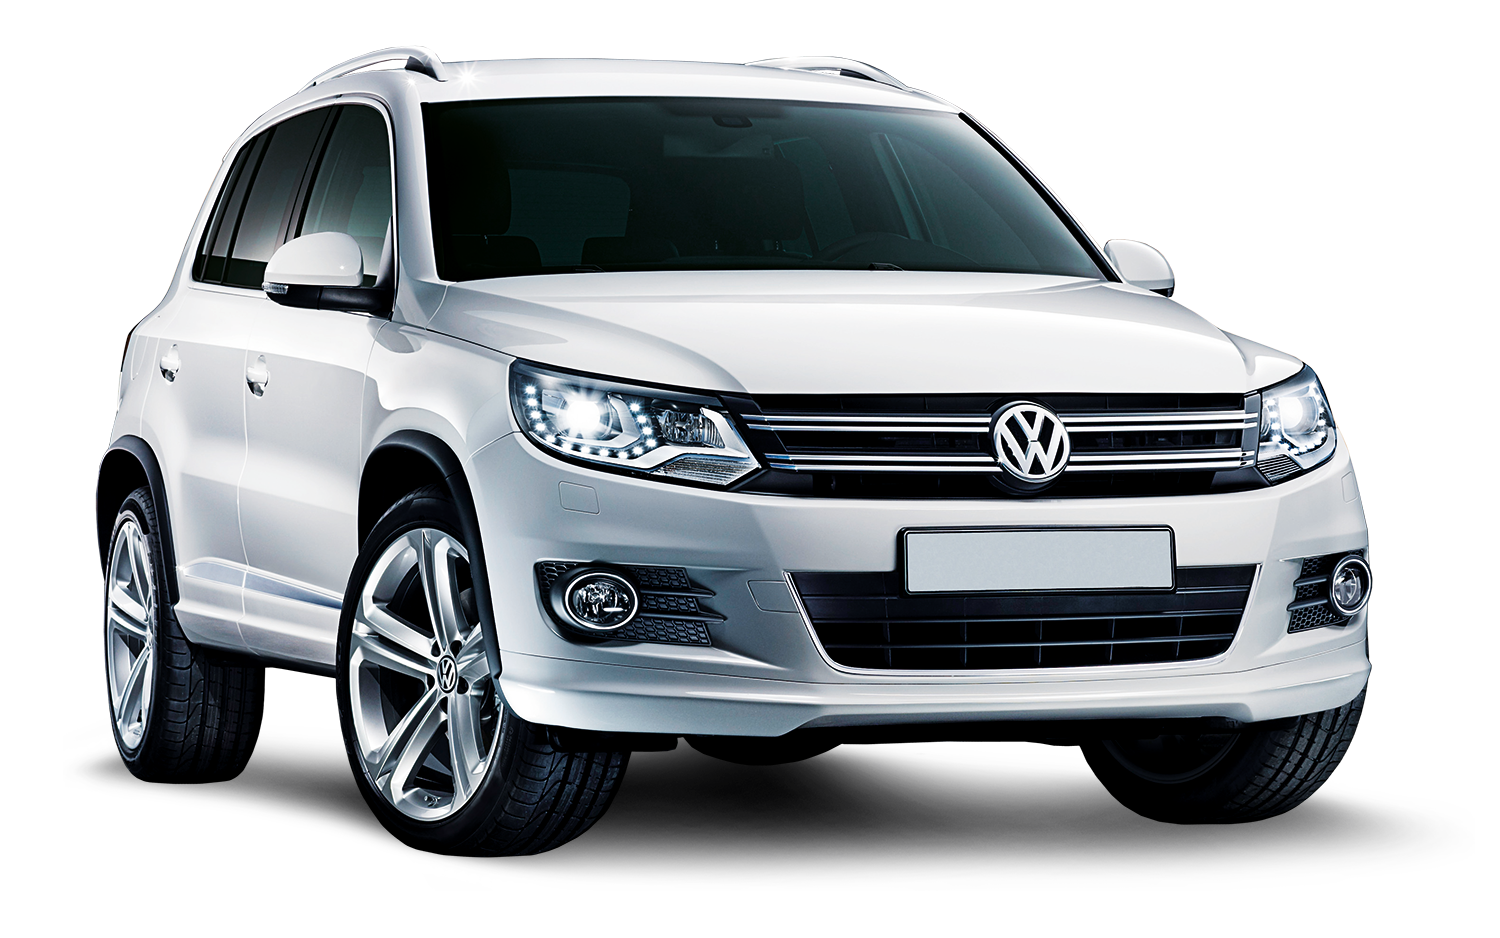 Volkswagen Png Hd - Images Of Cars, Transparent background PNG HD thumbnail